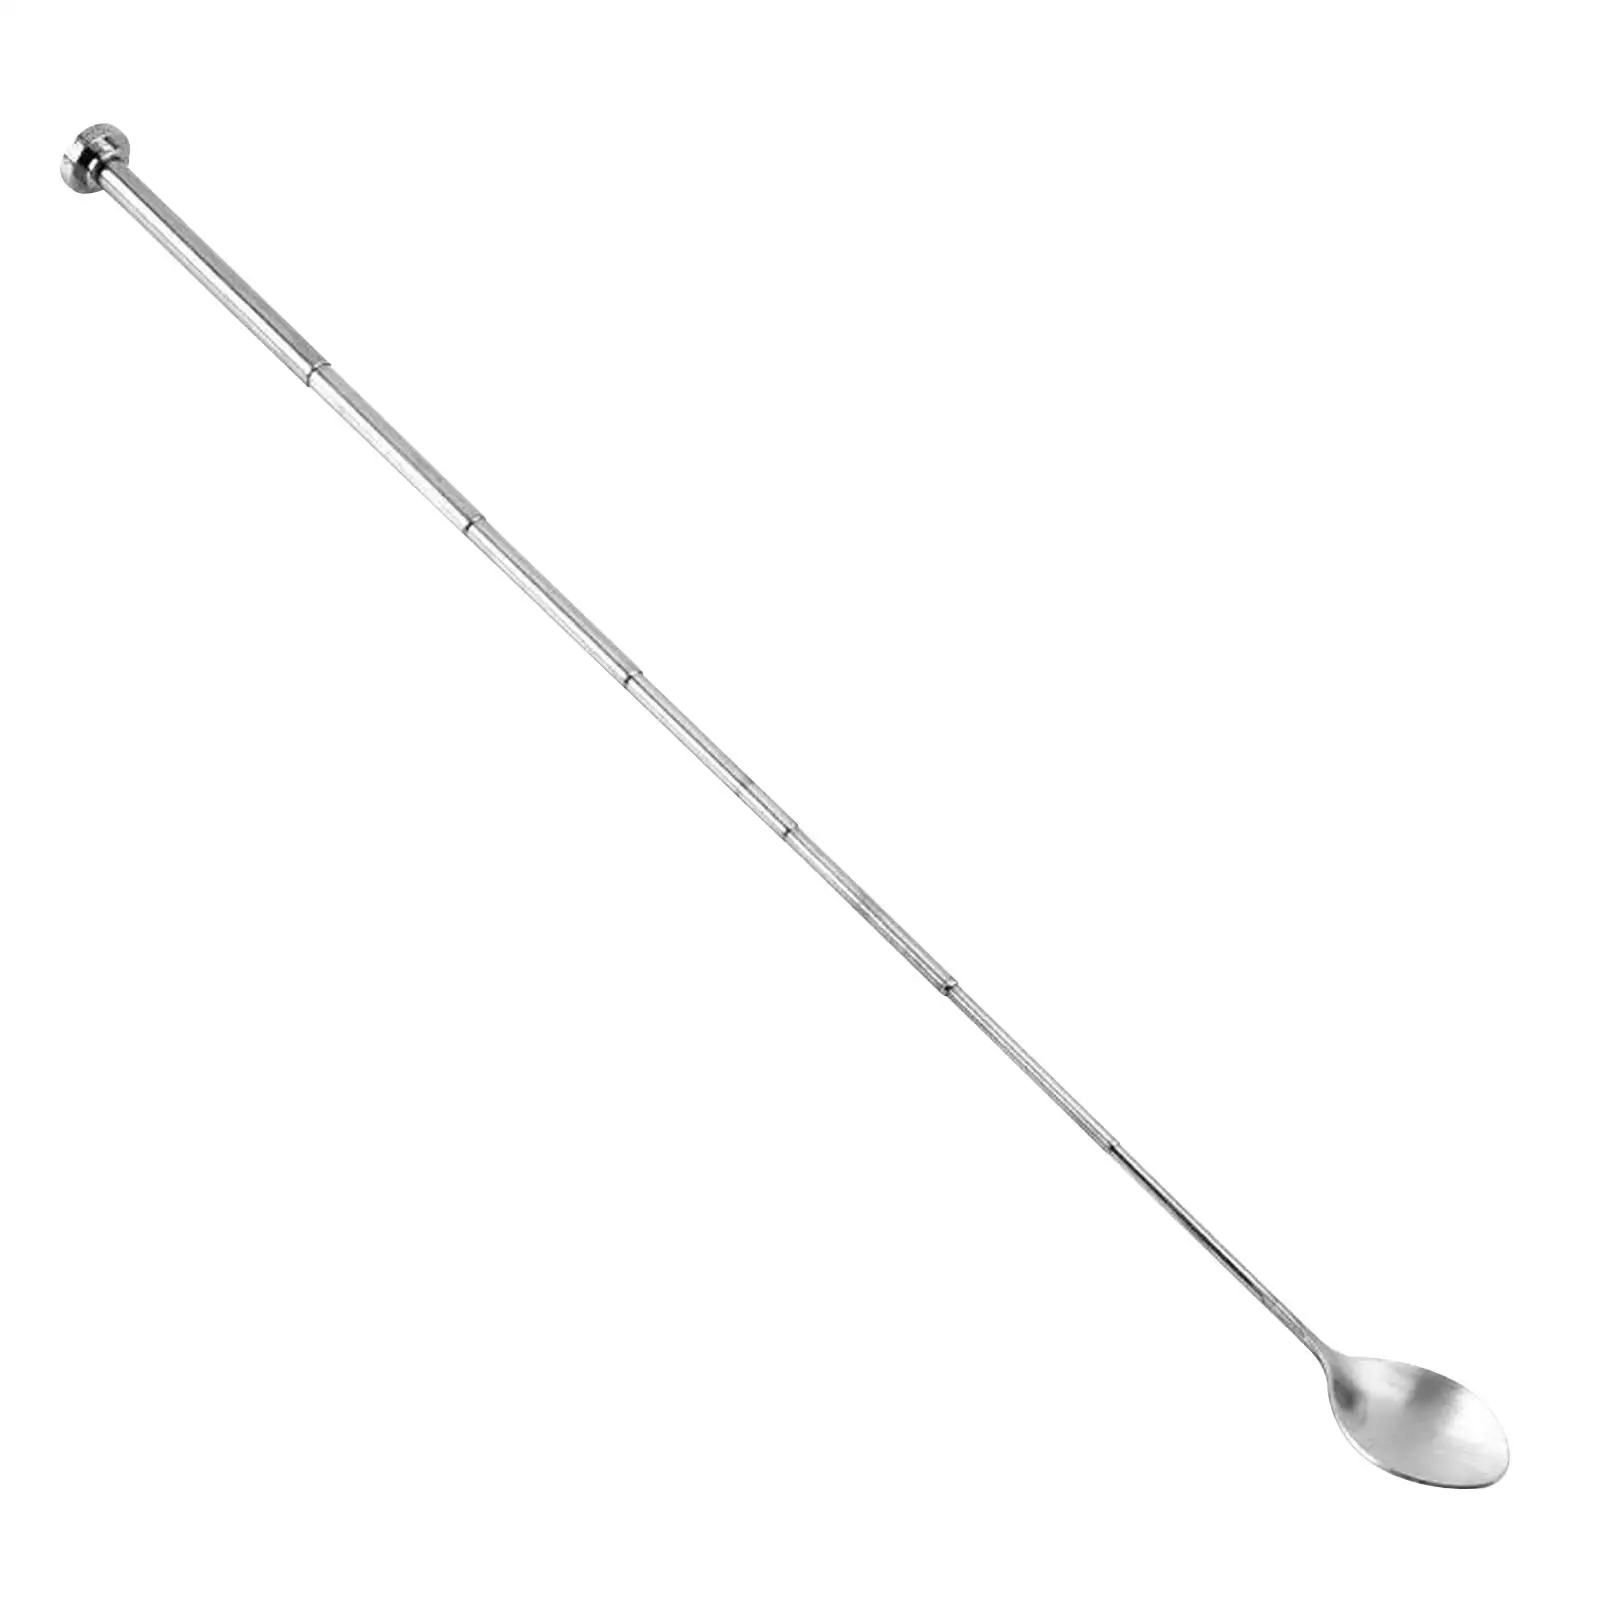 304 Stainless Steel Stirring Spoon Portable Retractable Spoon for Cocktail